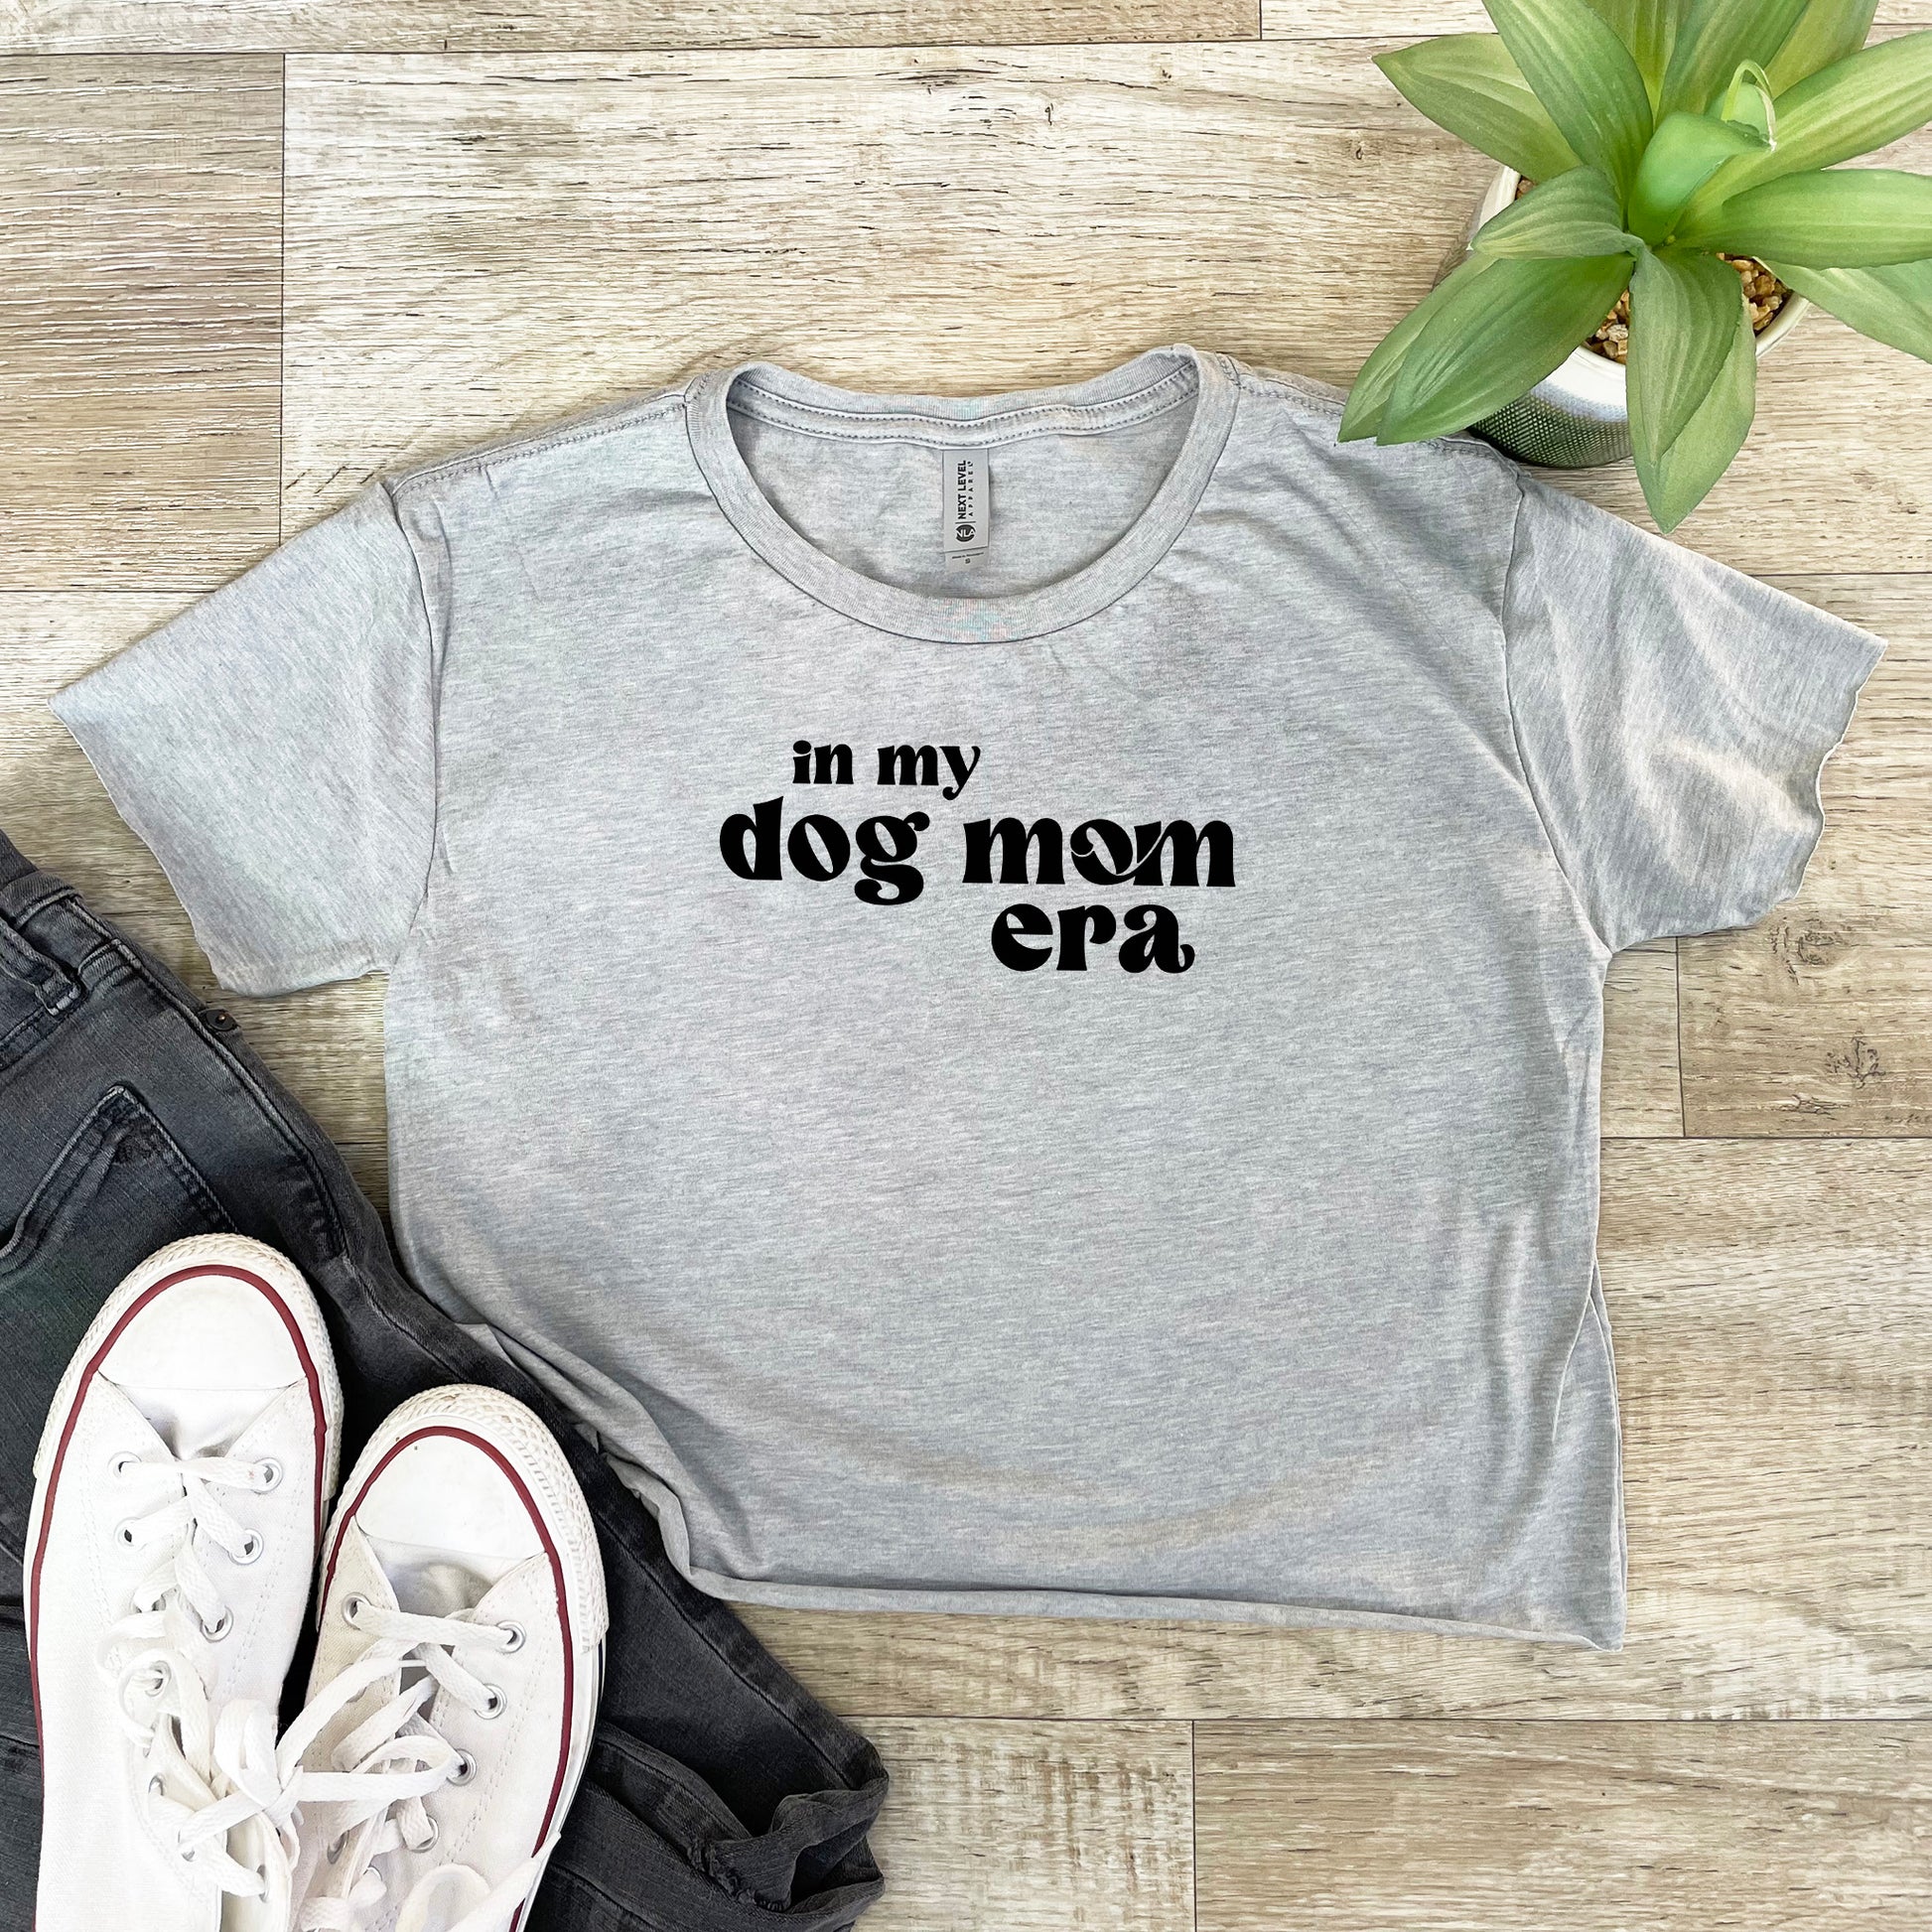 a t - shirt that says in my dog mom era